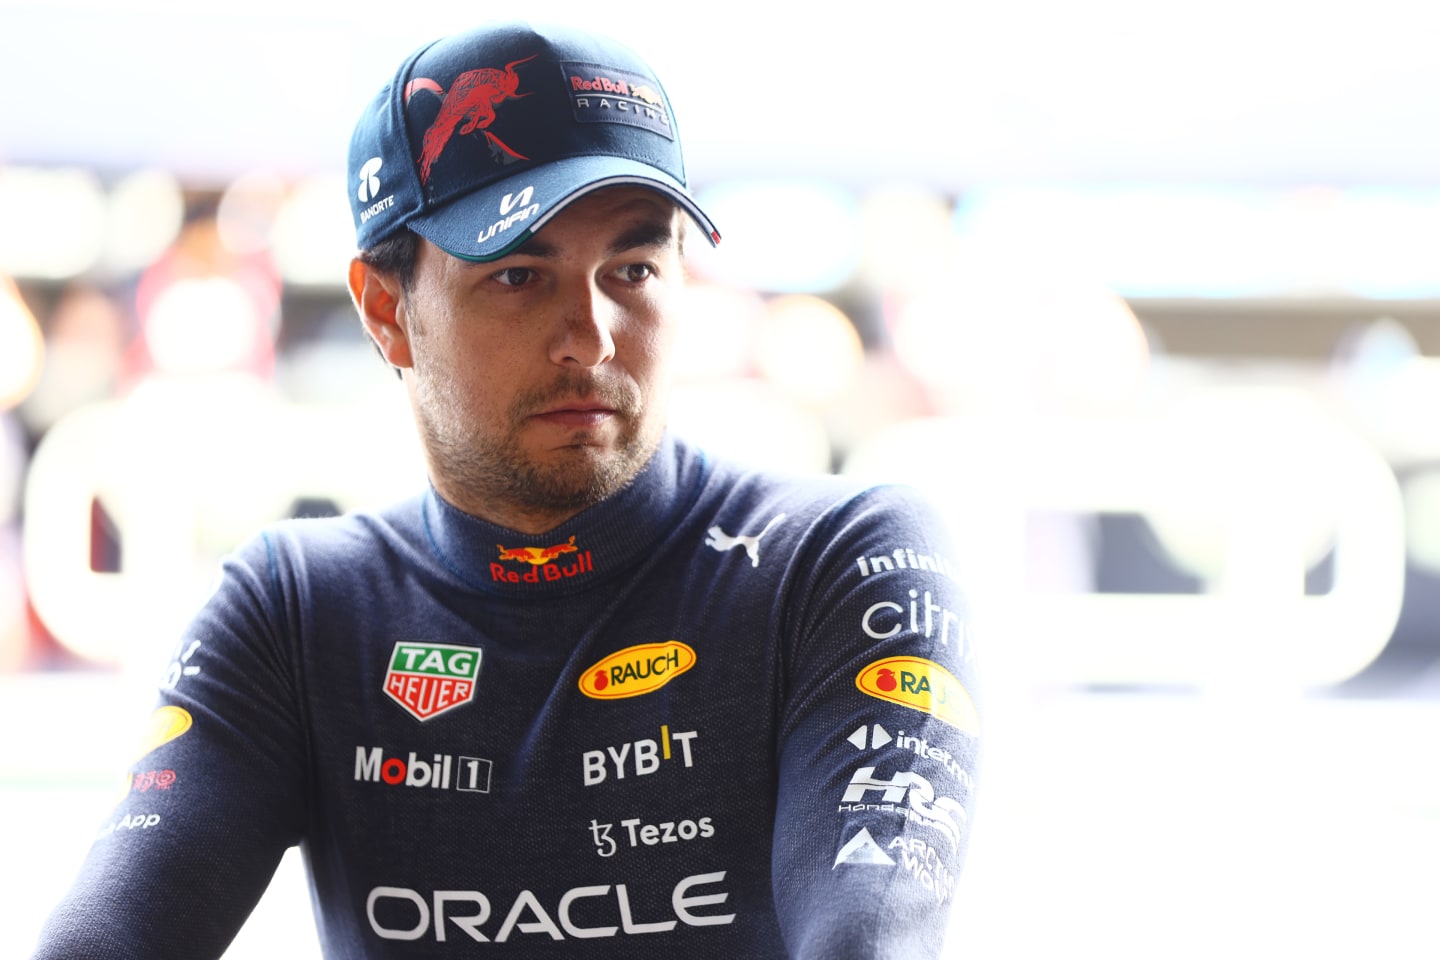 MELBOURNE, AUSTRALIA - APRIL 08: Sergio Perez of Mexico and Oracle Red Bull Racing prepares to drive in the garage during practice ahead of the F1 Grand Prix of Australia at Melbourne Grand Prix Circuit on April 08, 2022 in Melbourne, Australia. (Photo by Mark Thompson/Getty Images)